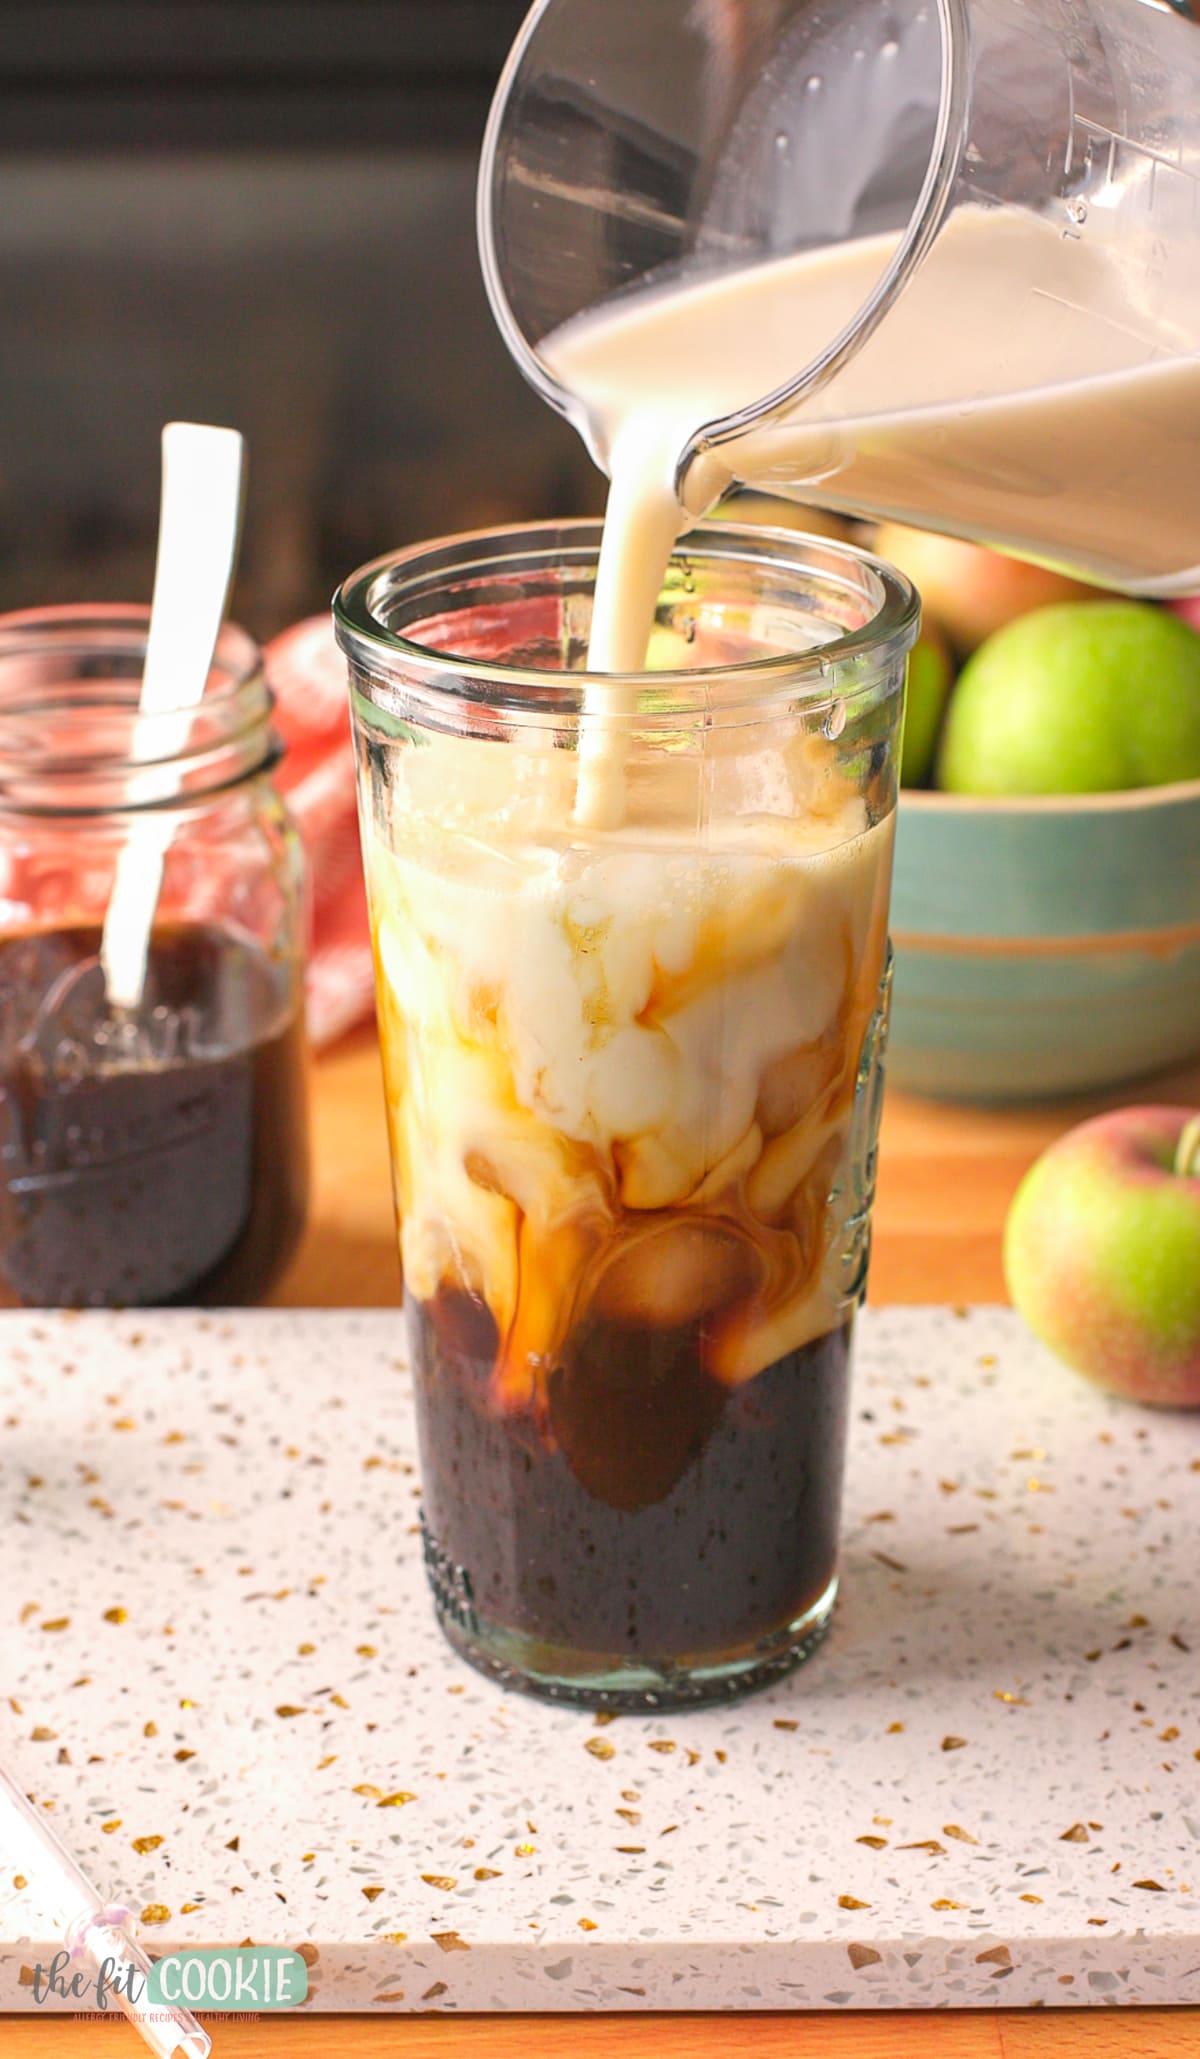 An iced coffee with apple brown sugar syrup being poured into a glass.